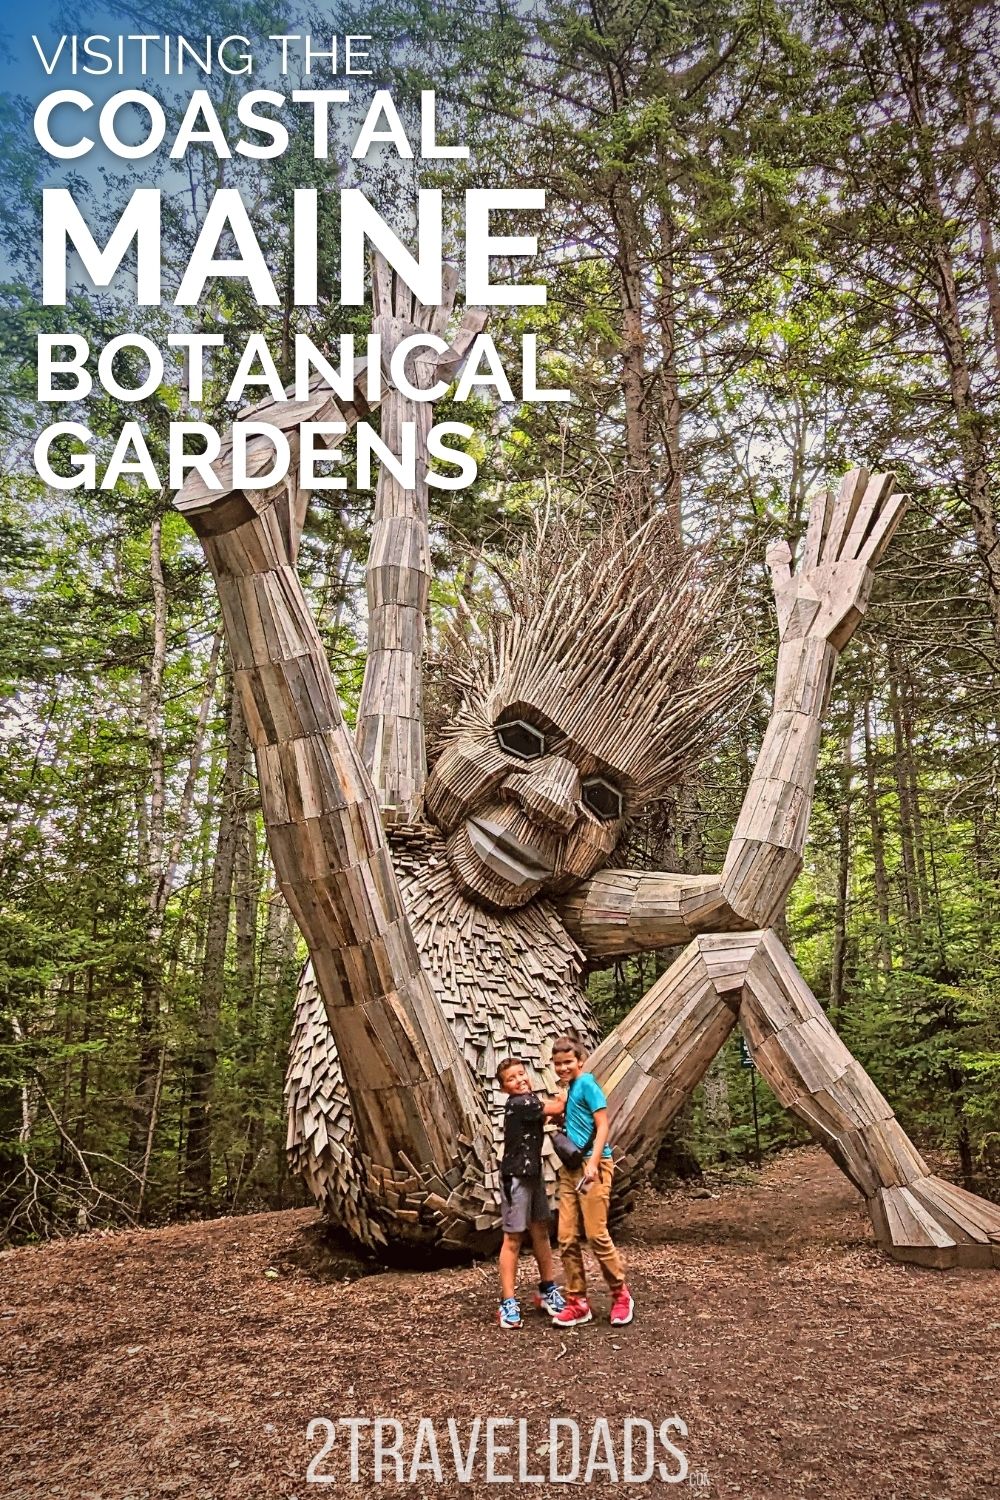 This is everything you need to know about visiting the Coastal Maine Botanical Gardens, from the famous Trolls to special events. Details about seasonal happening and types of gardens found at the CMBG in Boothbay on the Midcoast.